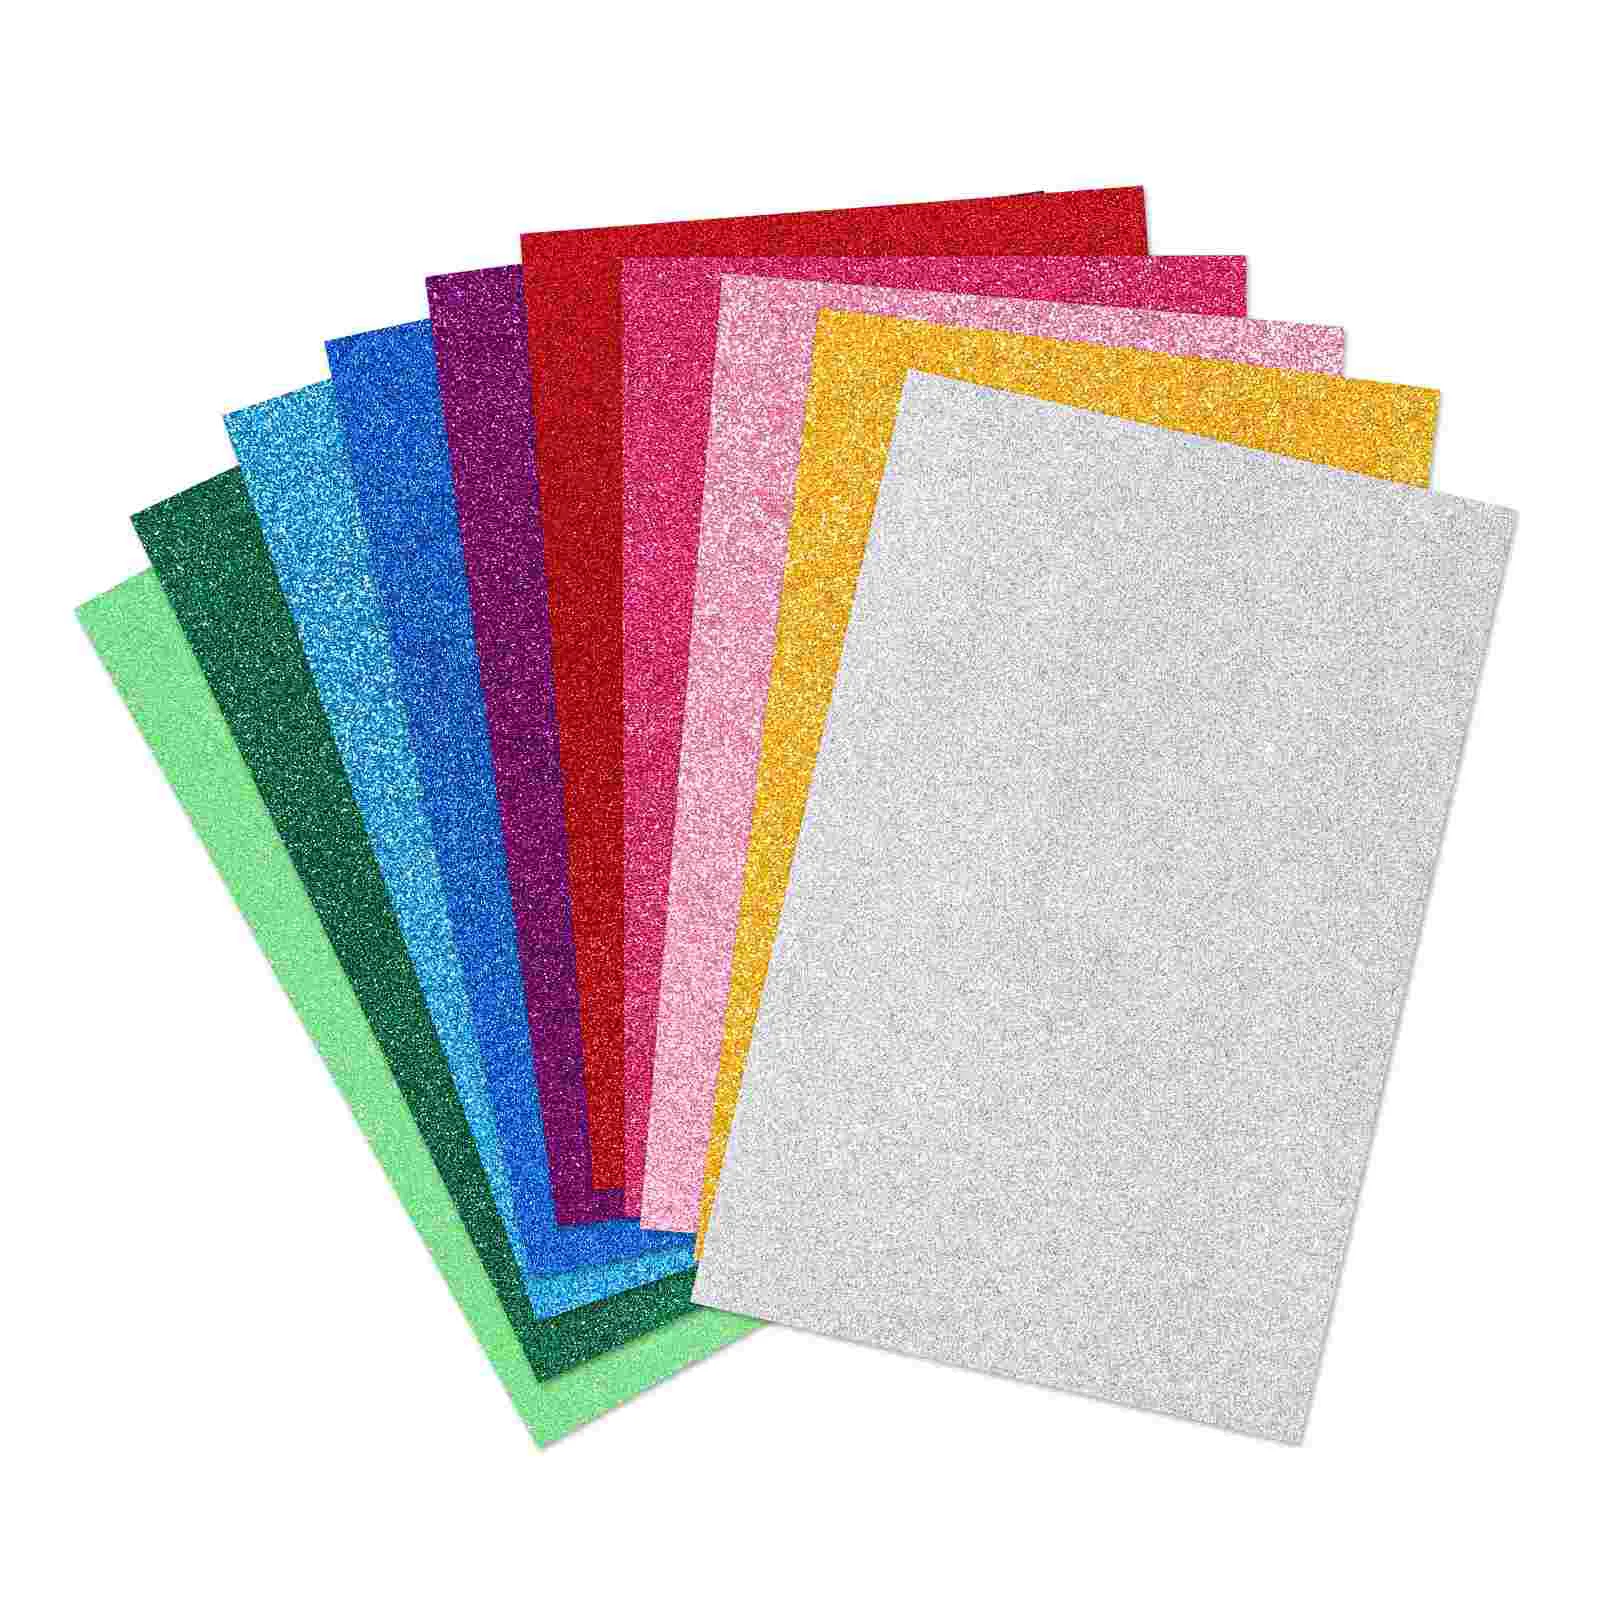 Sheets Paper Cardstock Craftcrafts Glittering Sheet Eva Handicraft Decor Colors Assorted Glitter Wrapping Party Birthday Box